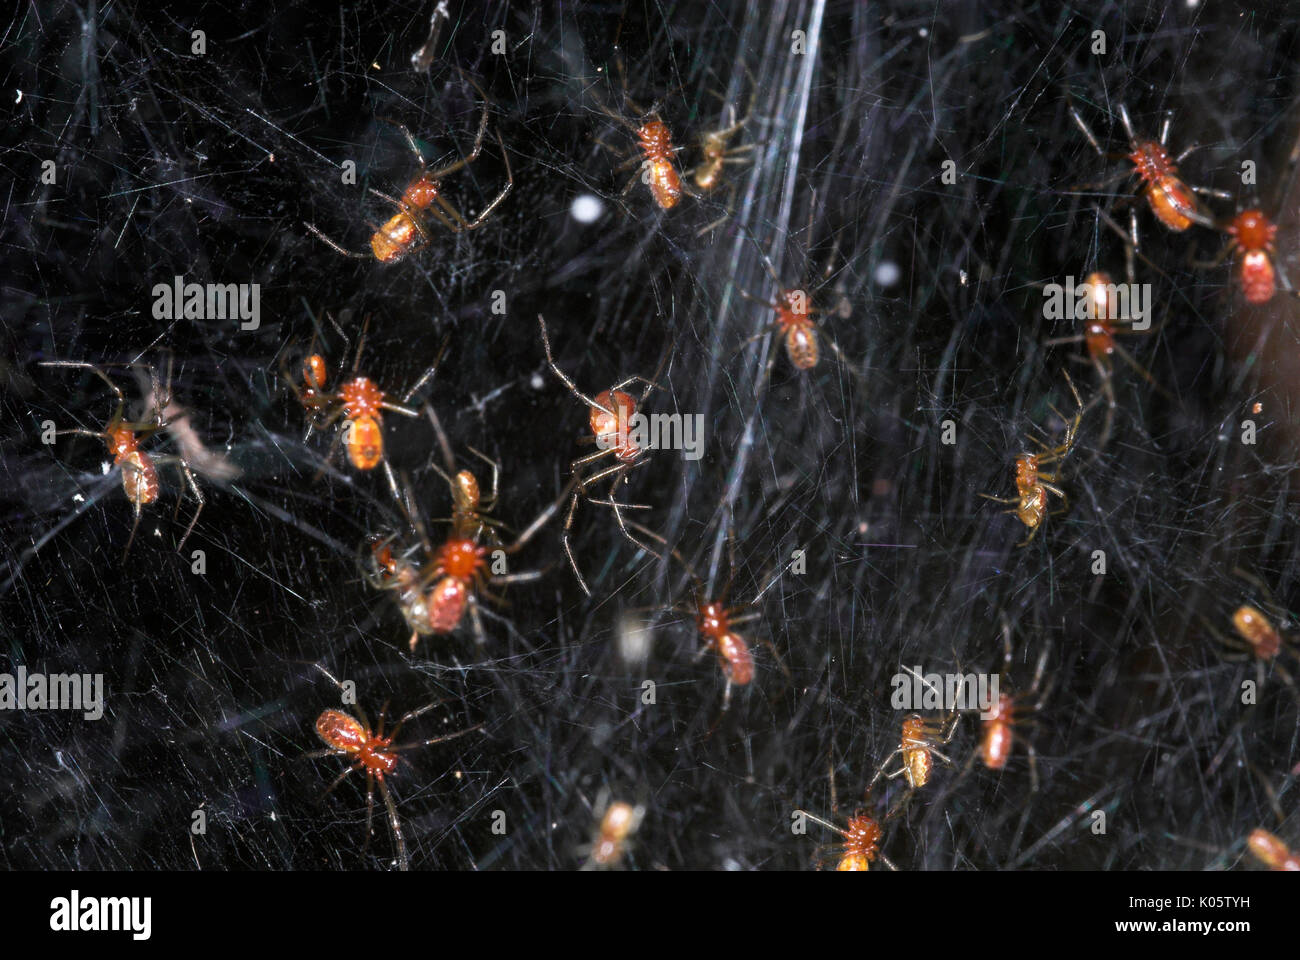 Communal Spiders on web, possibly Anelosimus eximius sp., Manu Peru, group, small, work together, amazon, jungle Stock Photo